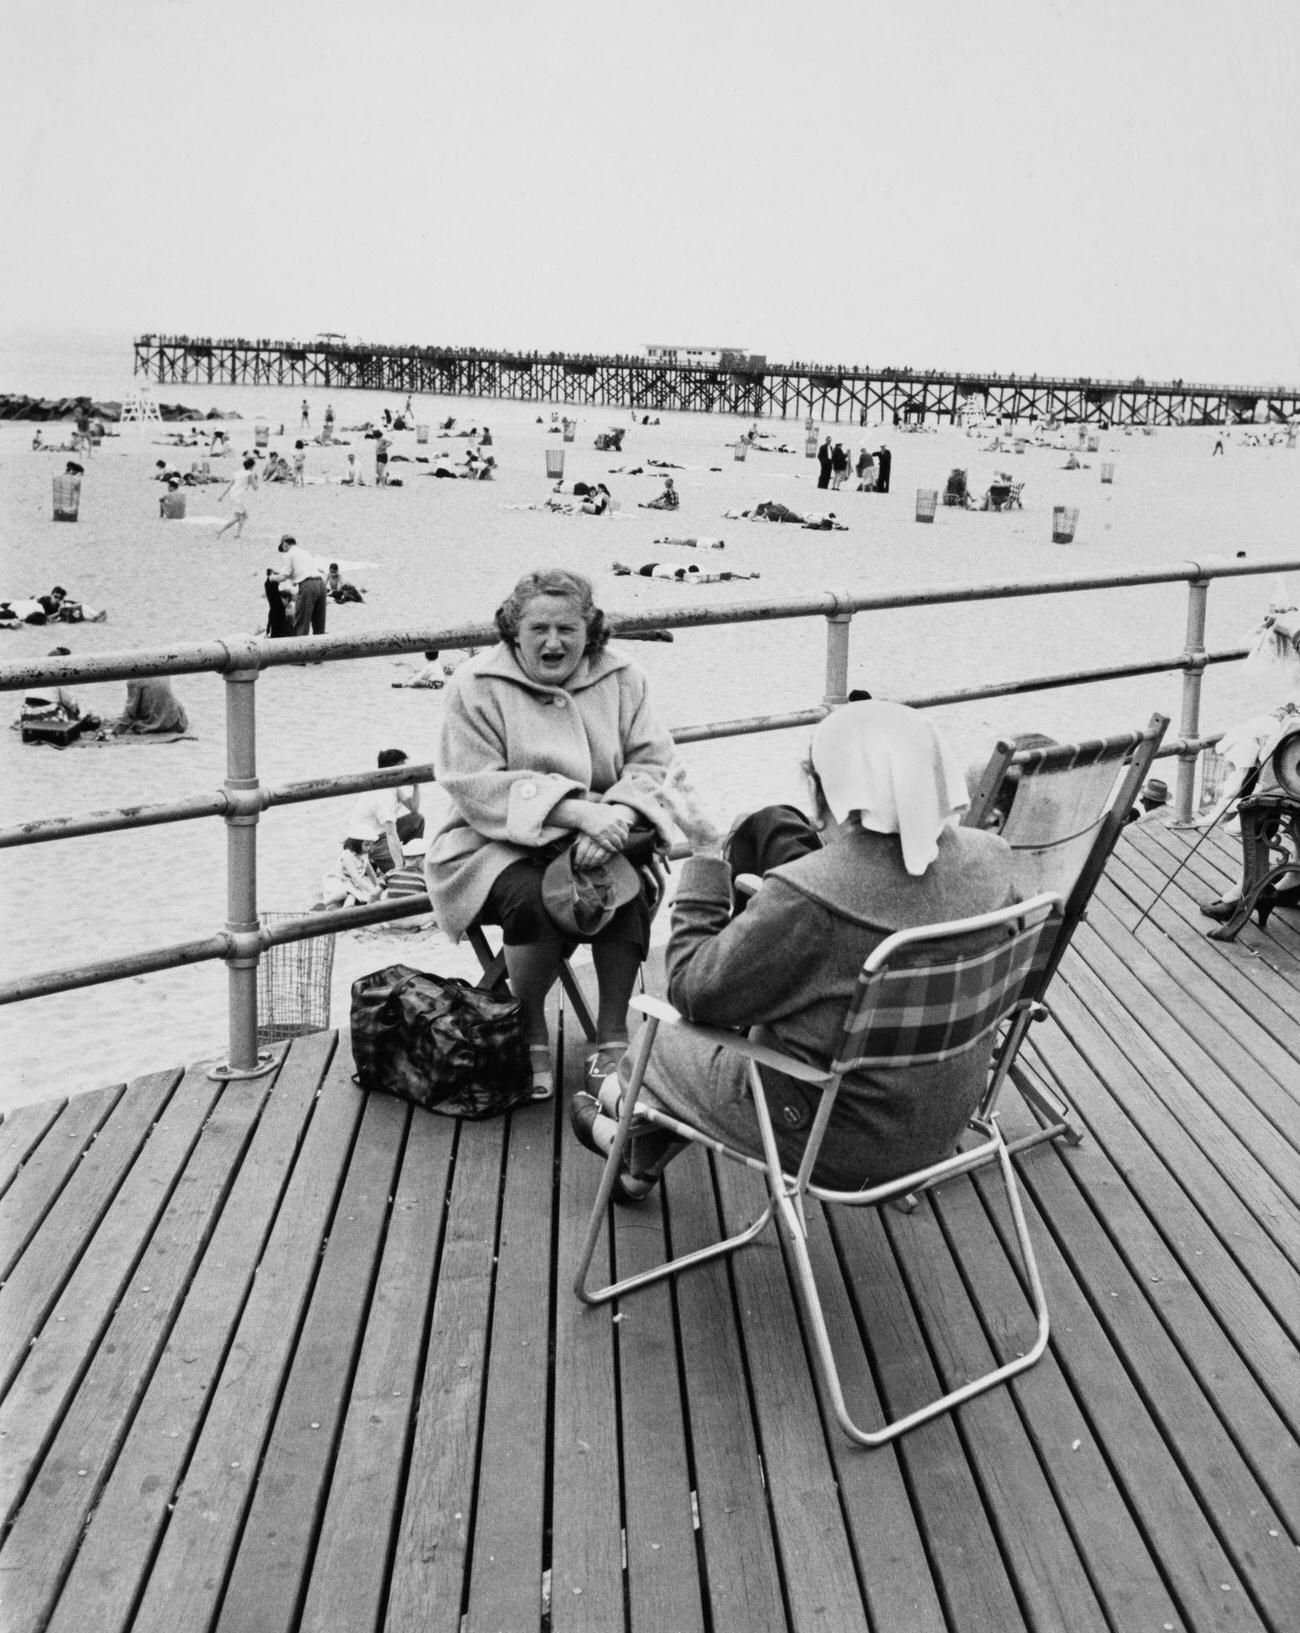 Women In Coats On Boardwalk Contrasting With Swimmers, May 1959